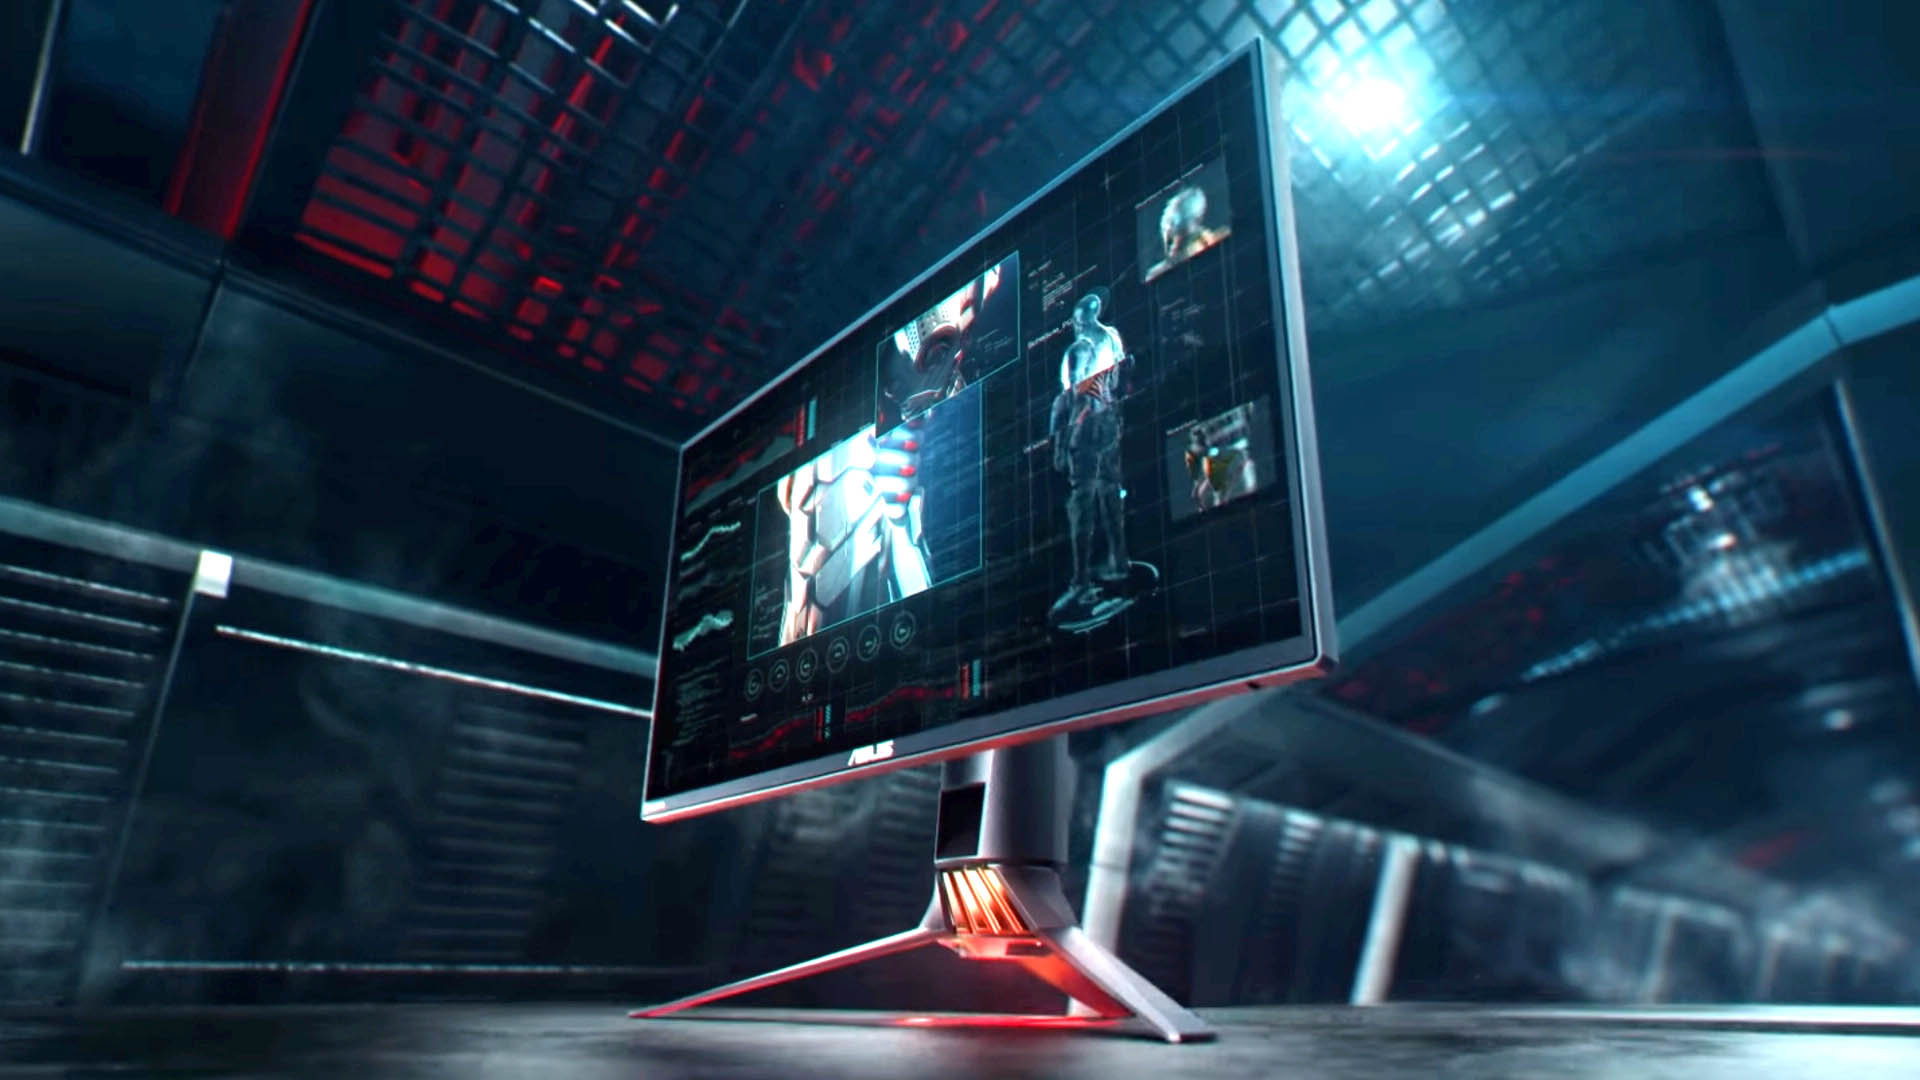 We’ll soon get 480Hz gaming monitors with better blacks, but OLED is still absent